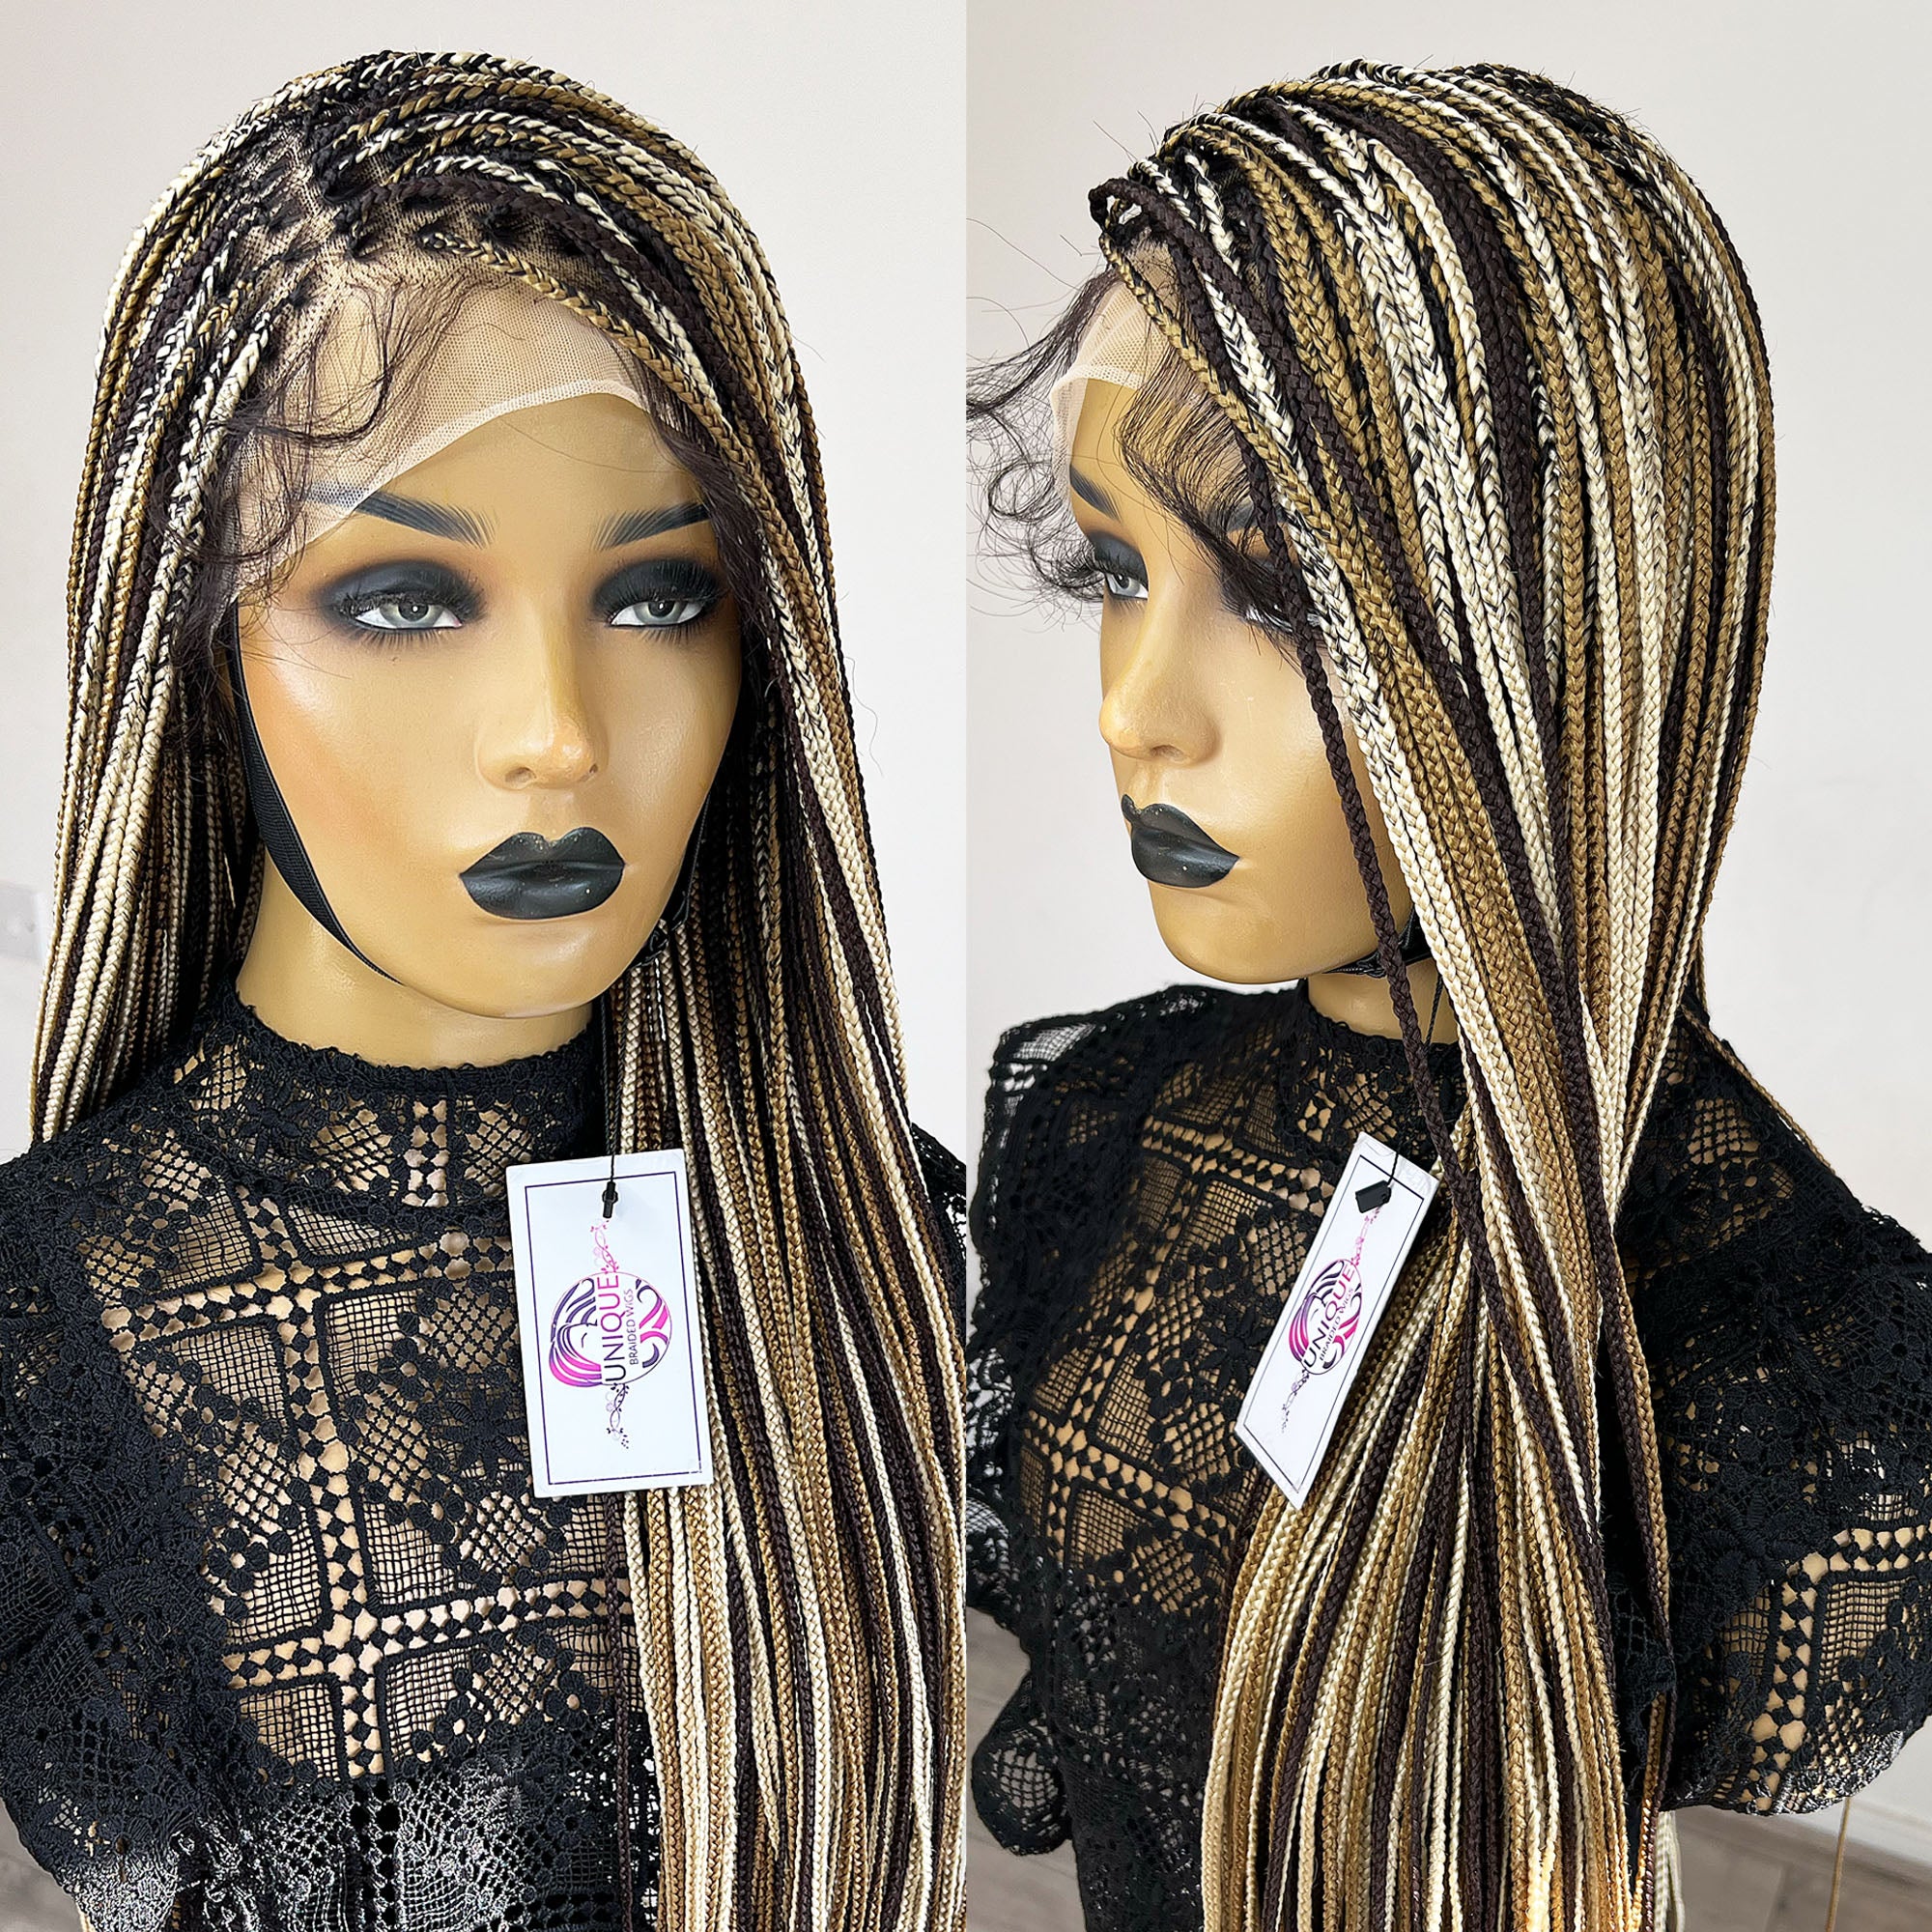 Small Knotless Box Braided Wig - Ivy